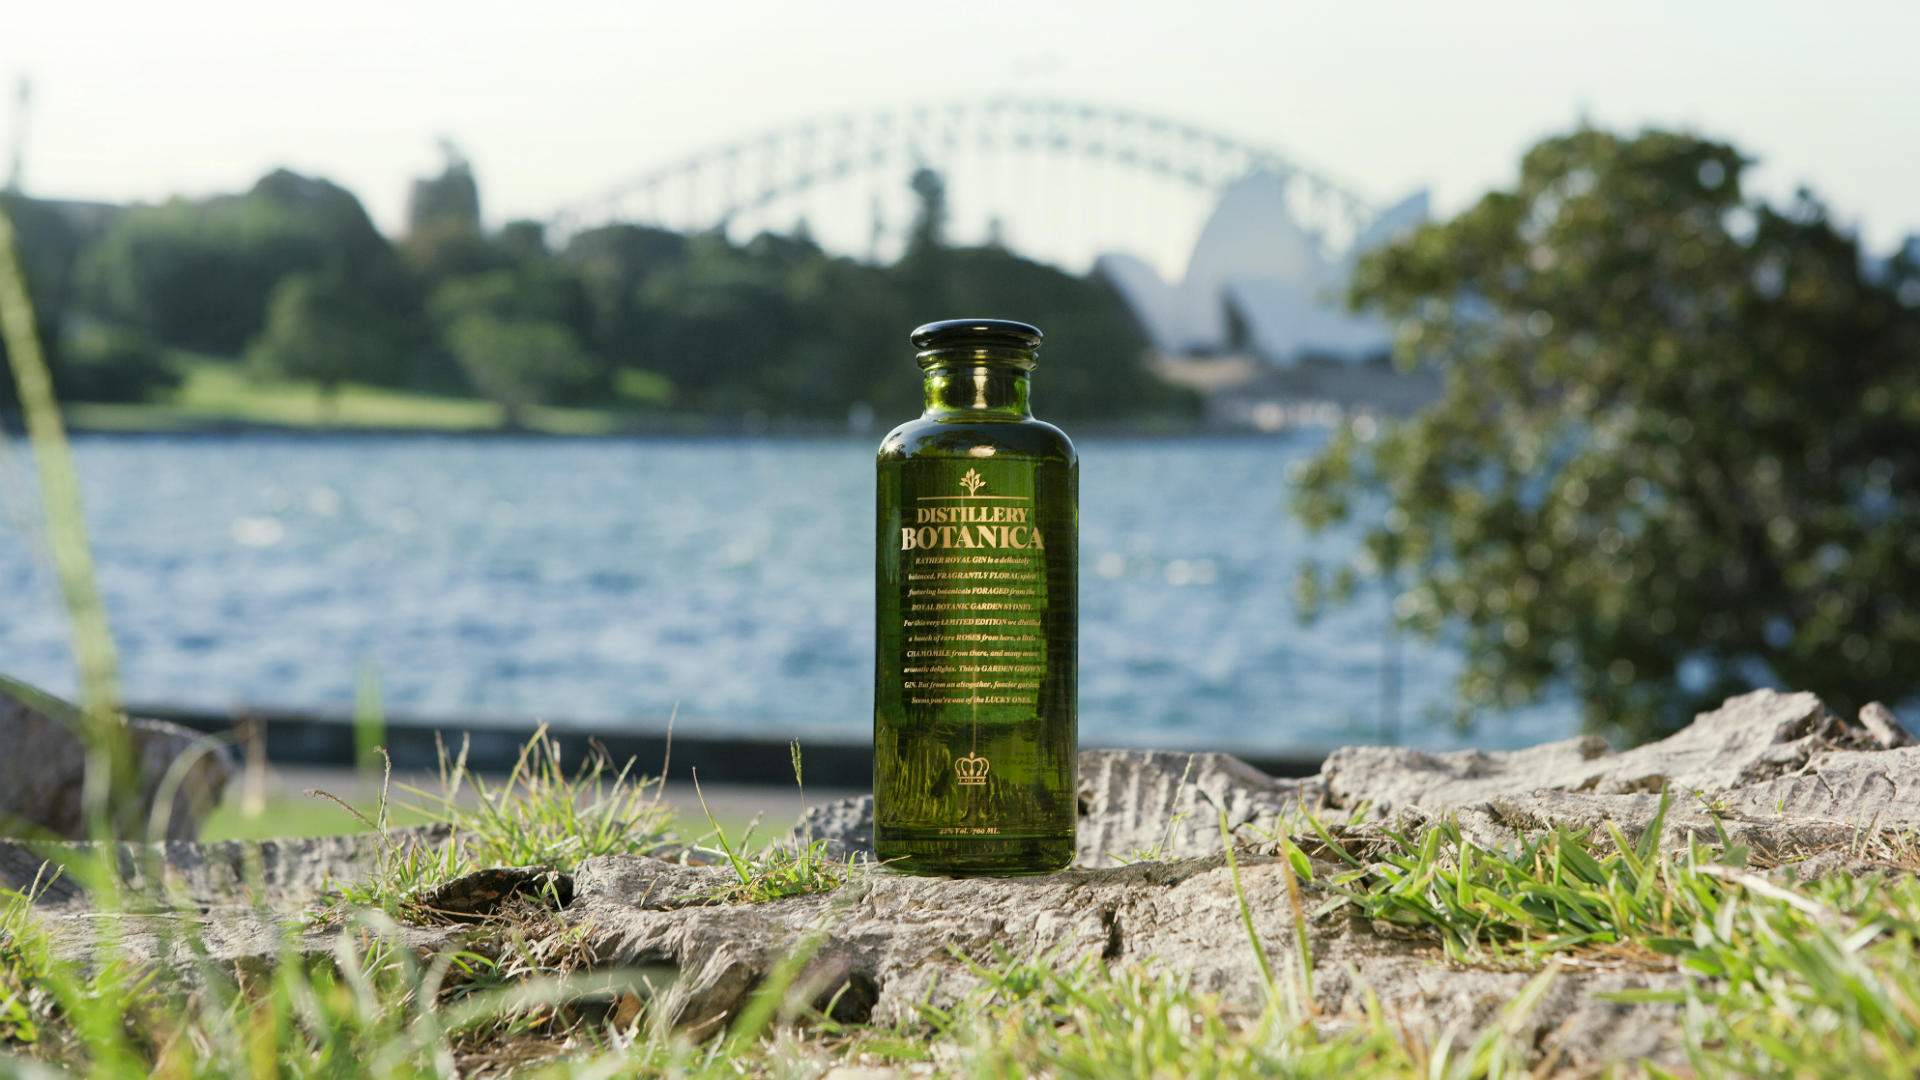 This New Gin Is Made from Botanicals Grown in Sydney's Royal Botanic Garden